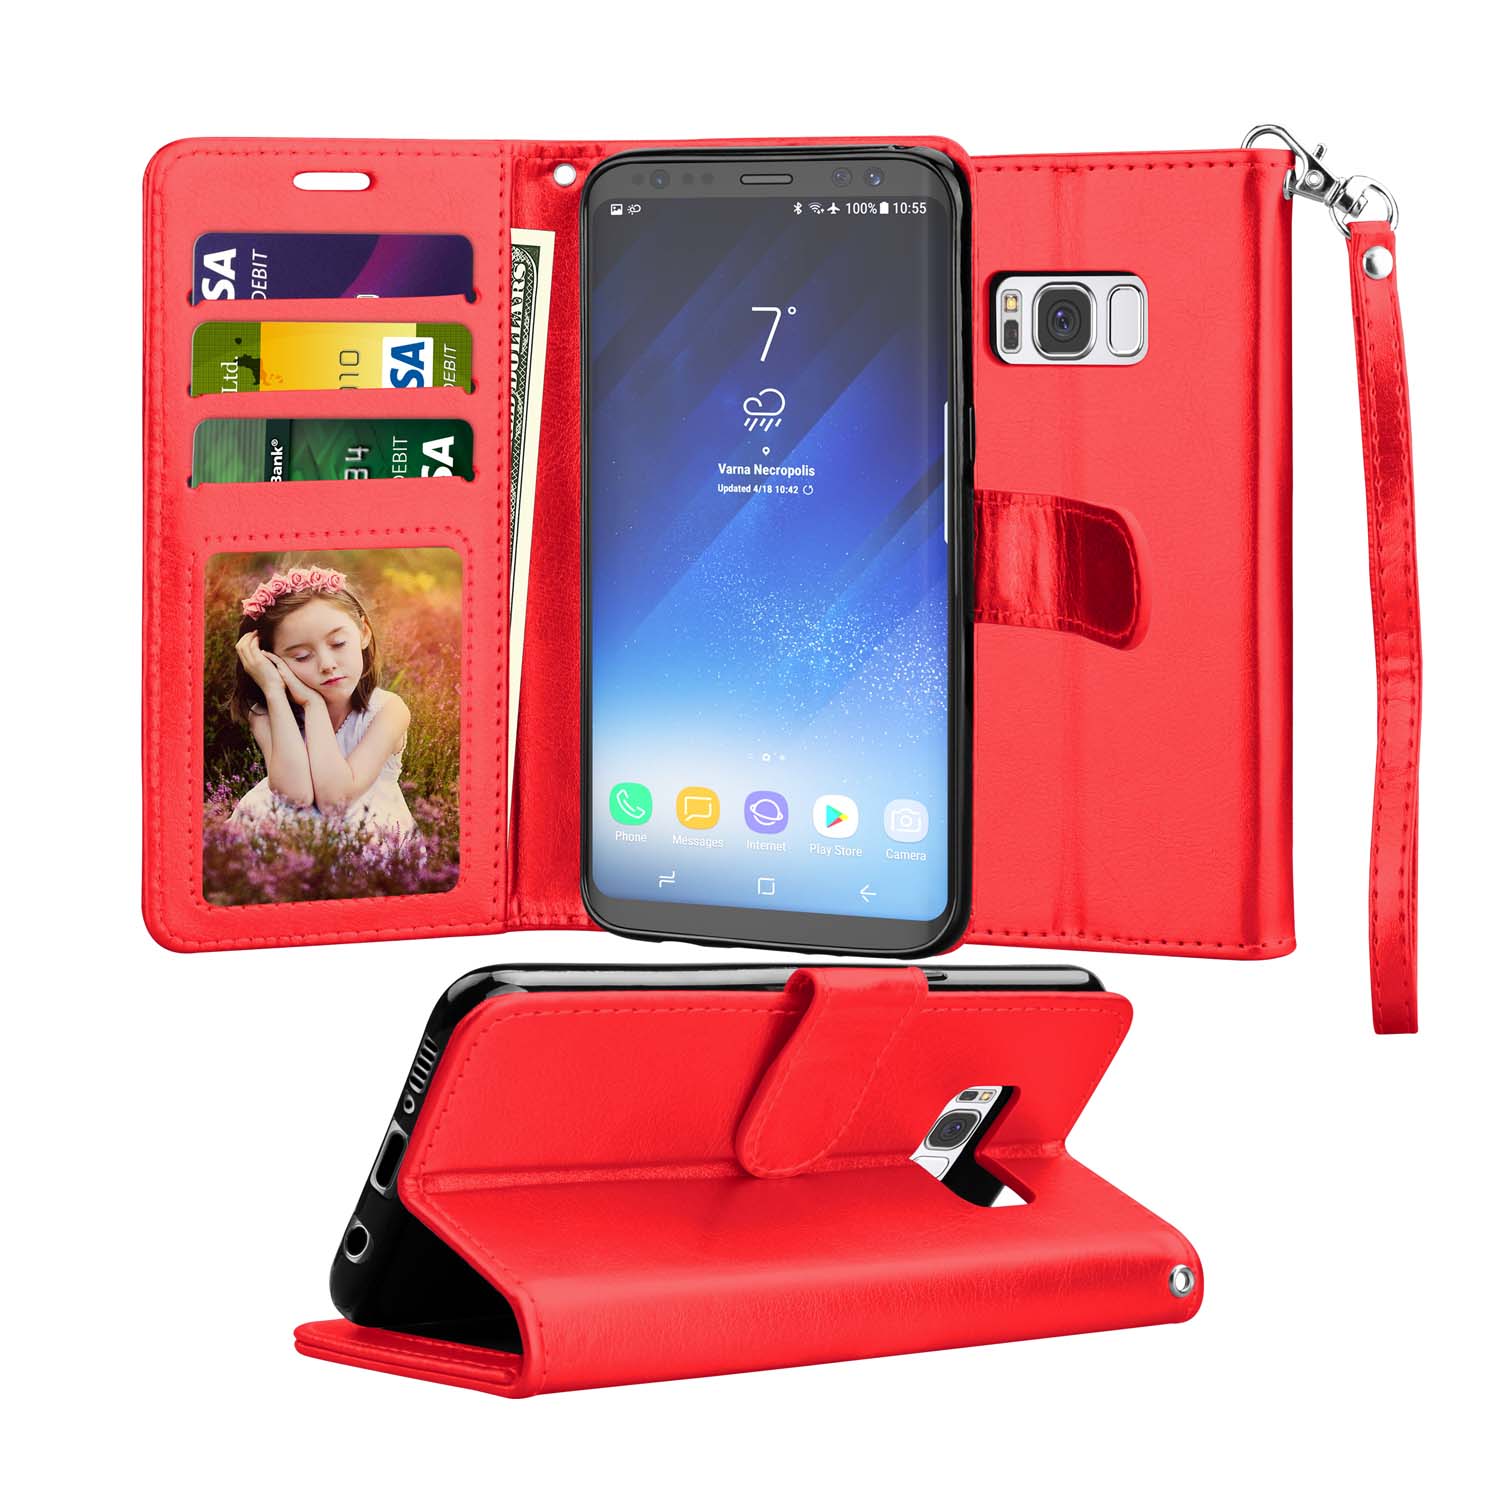 Tekcoo Galaxy S8 / S8 Plus Wallet Case, for Galaxy S8 / S8+ PU Leather Case, Tekcoo [Red] PU Leather [3 Card Slots] ID Credit Flip Cover [Kickstand] Cover & Wrist Strap - image 1 of 5